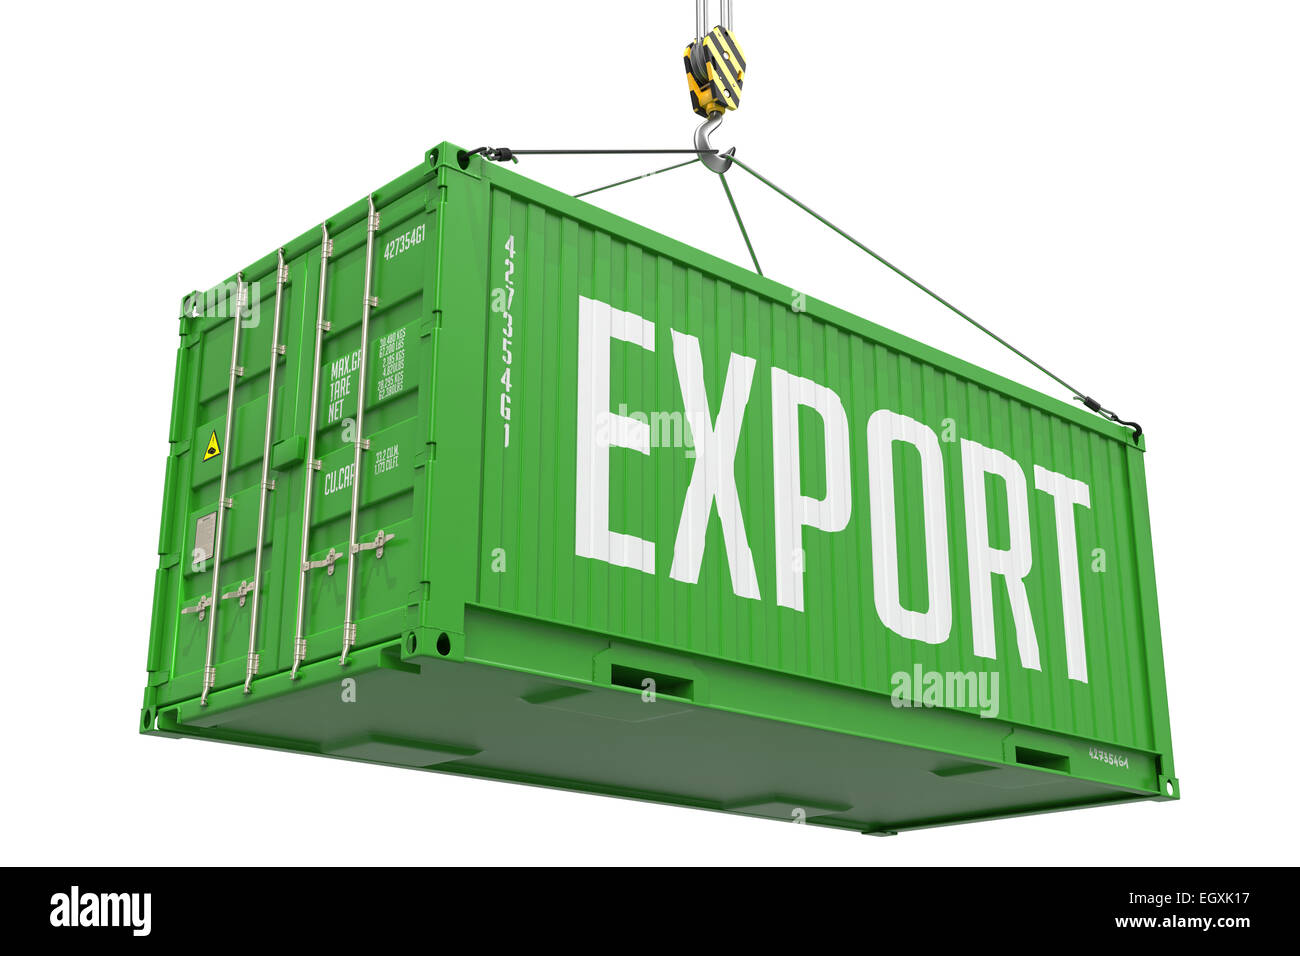 Export - Green Hanging Cargo Container. Stock Photo